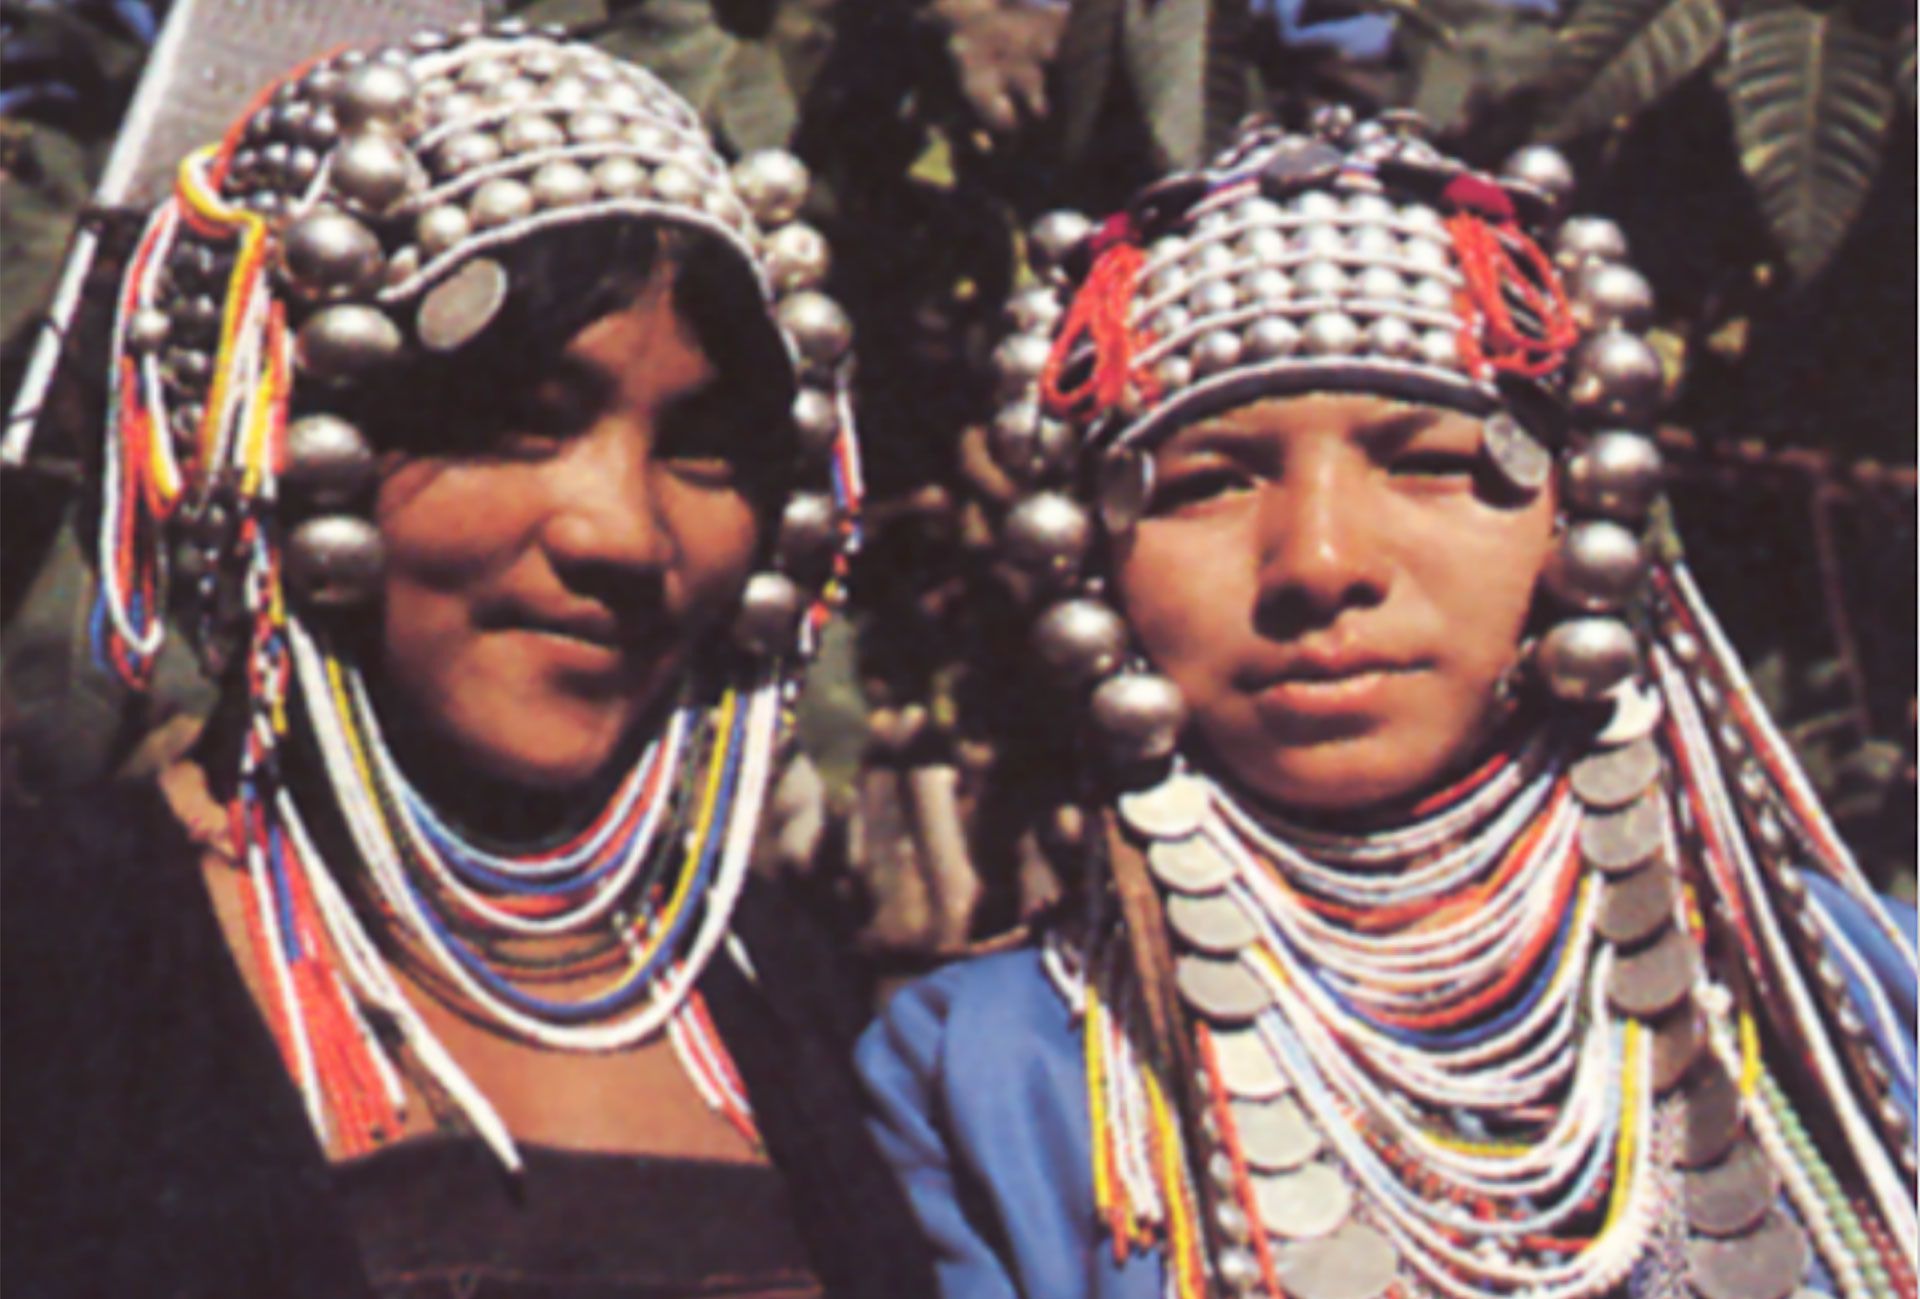 Two Akha women from northern Thailand. Art Aurea also reported on ethnographical topics. Photo Peter Herion